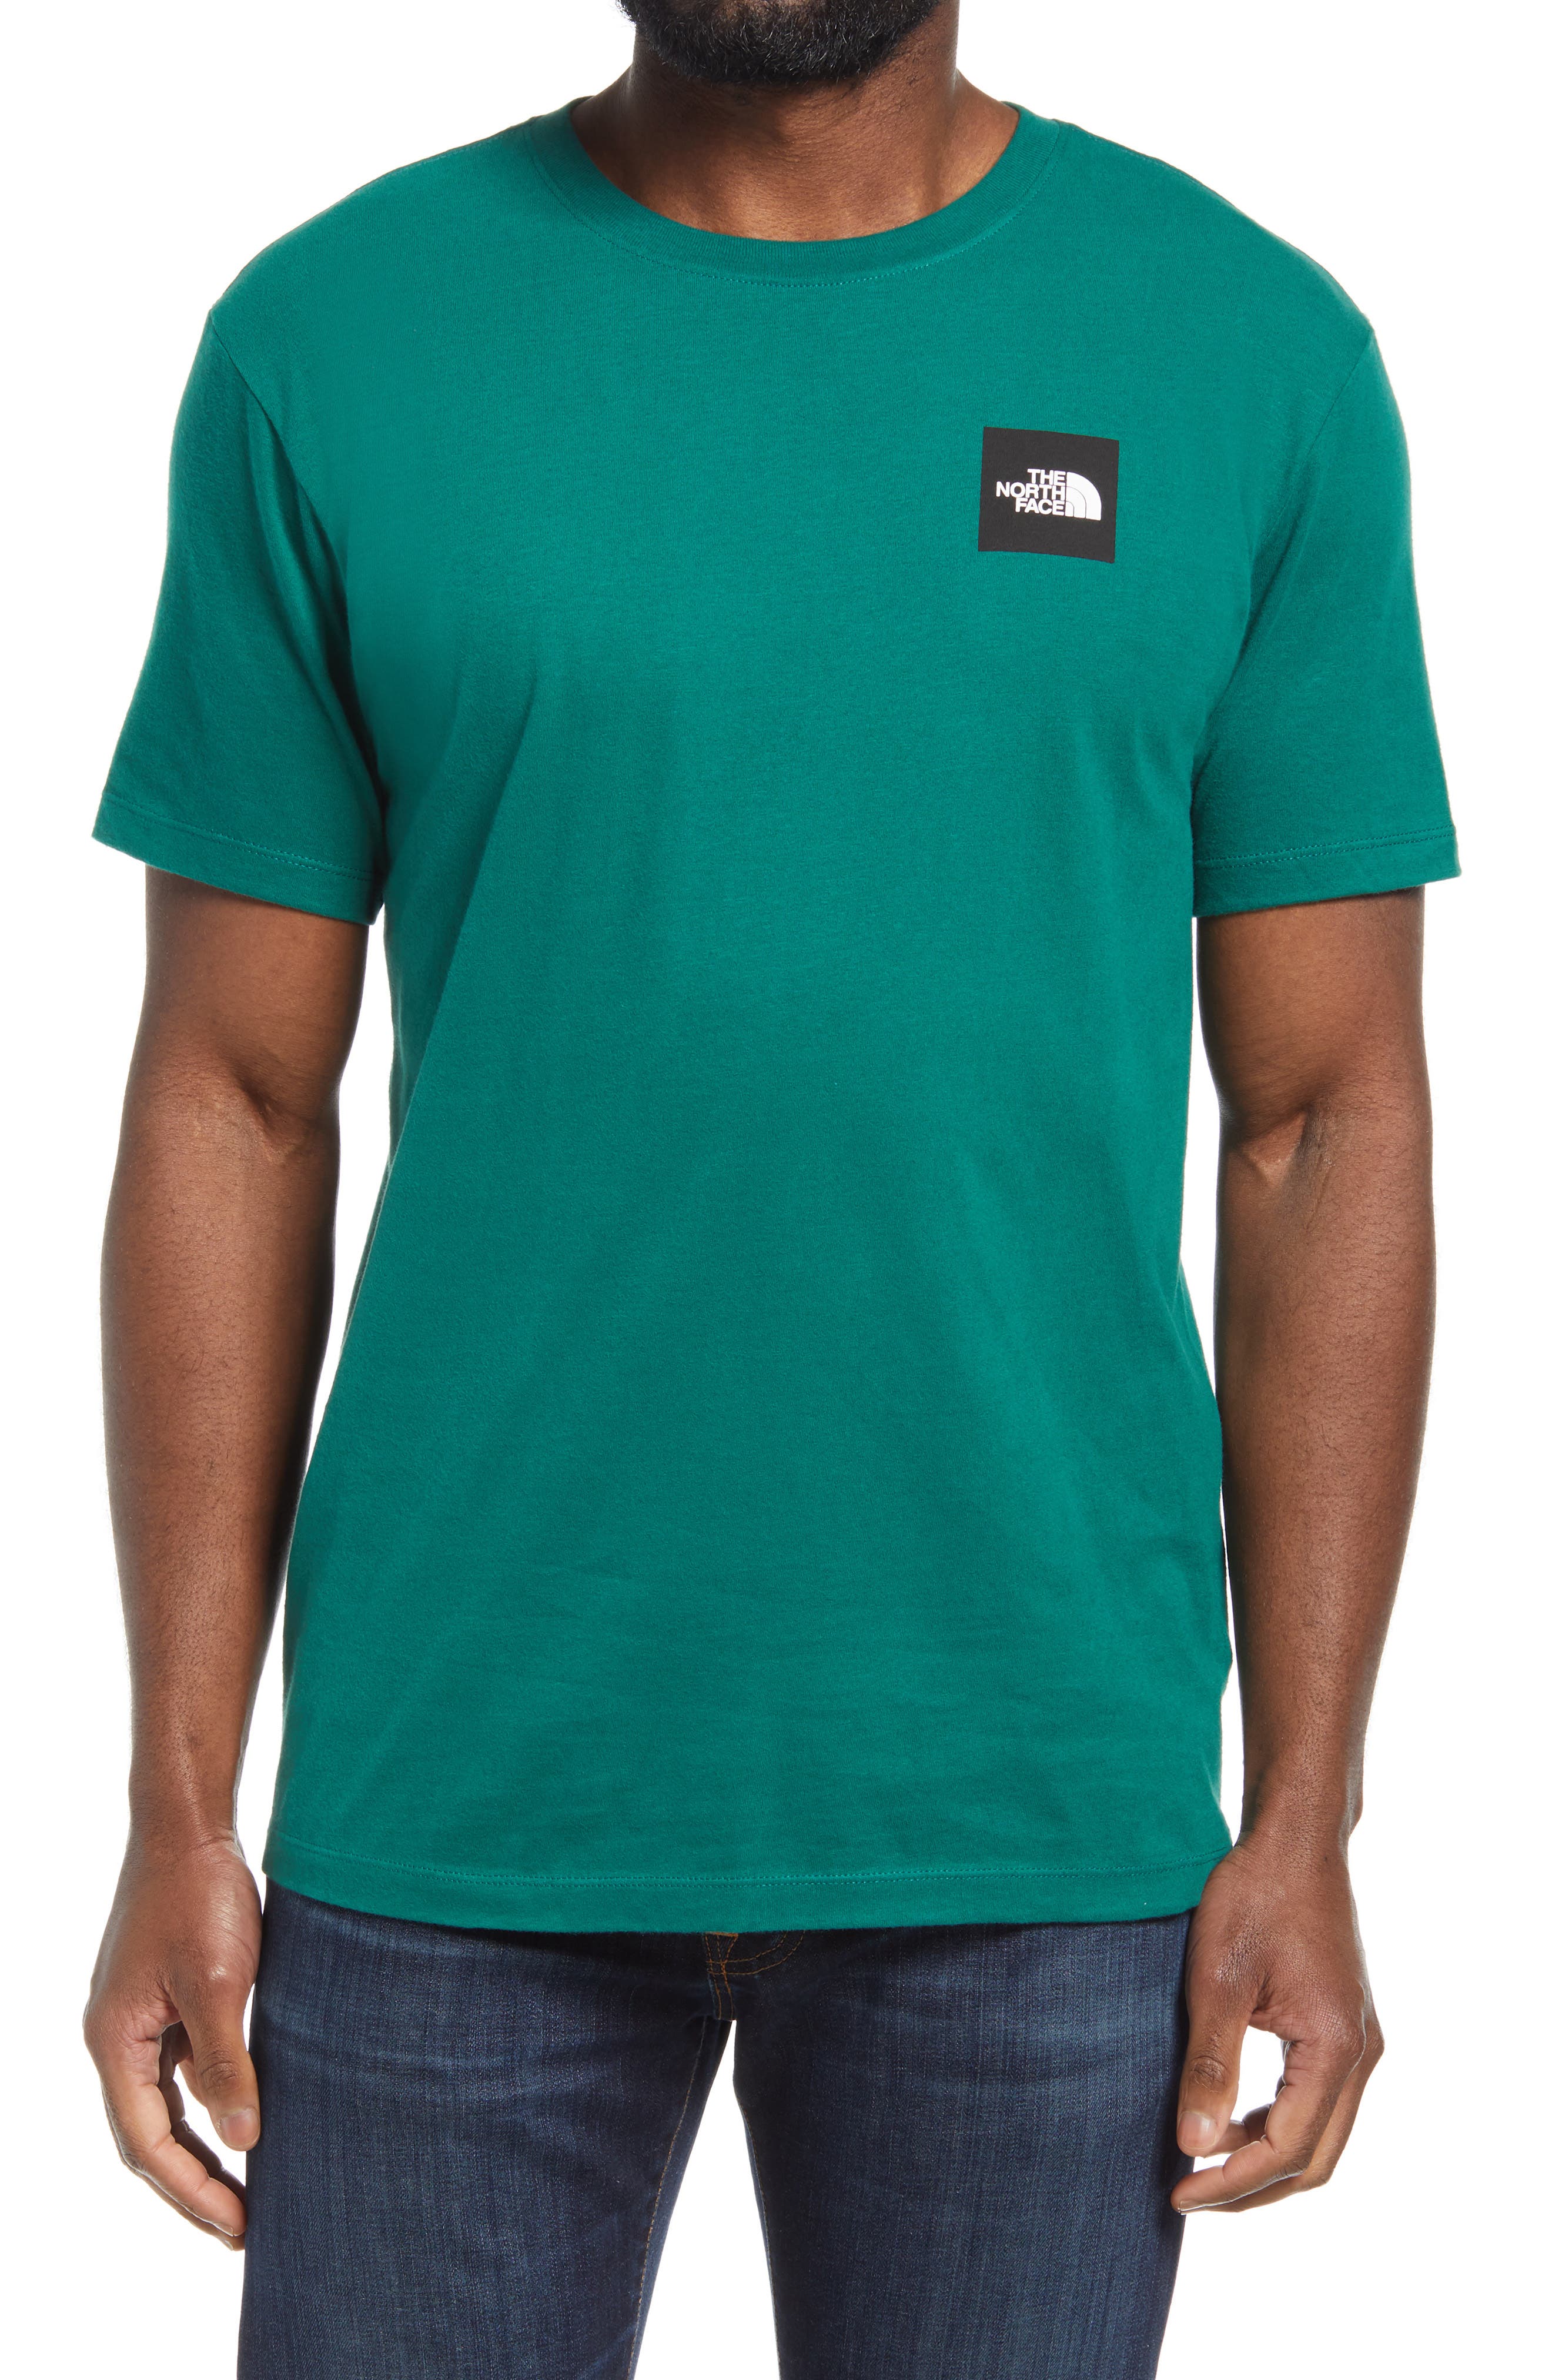 mens red north face t shirt